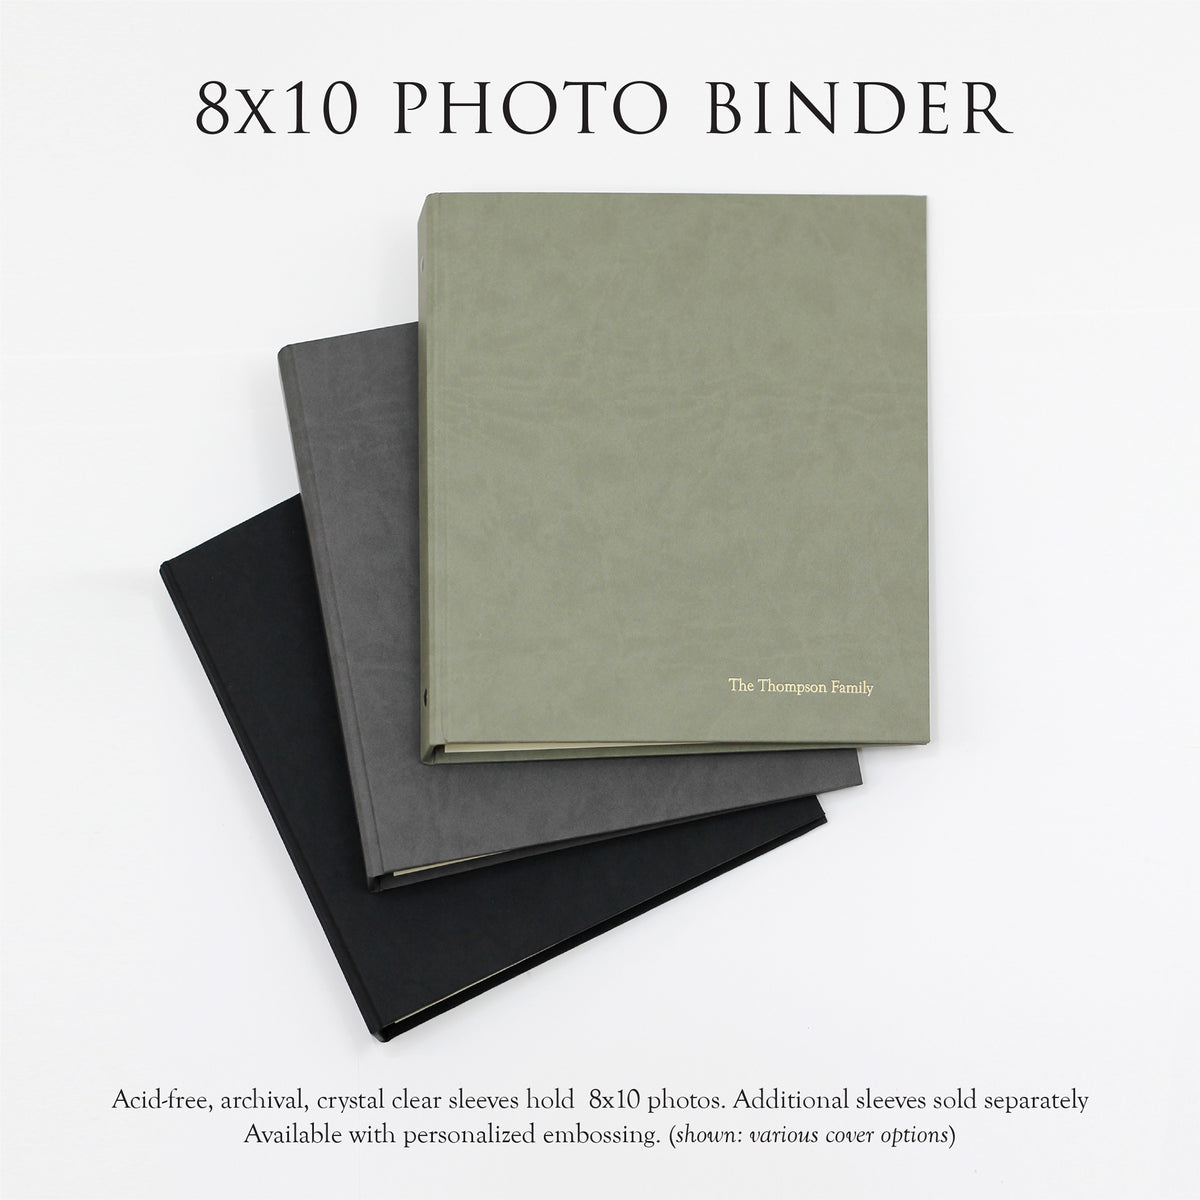 Large Photo Binder For 8x10 Photos | Cover: Amethyst Silk | Available Personalized